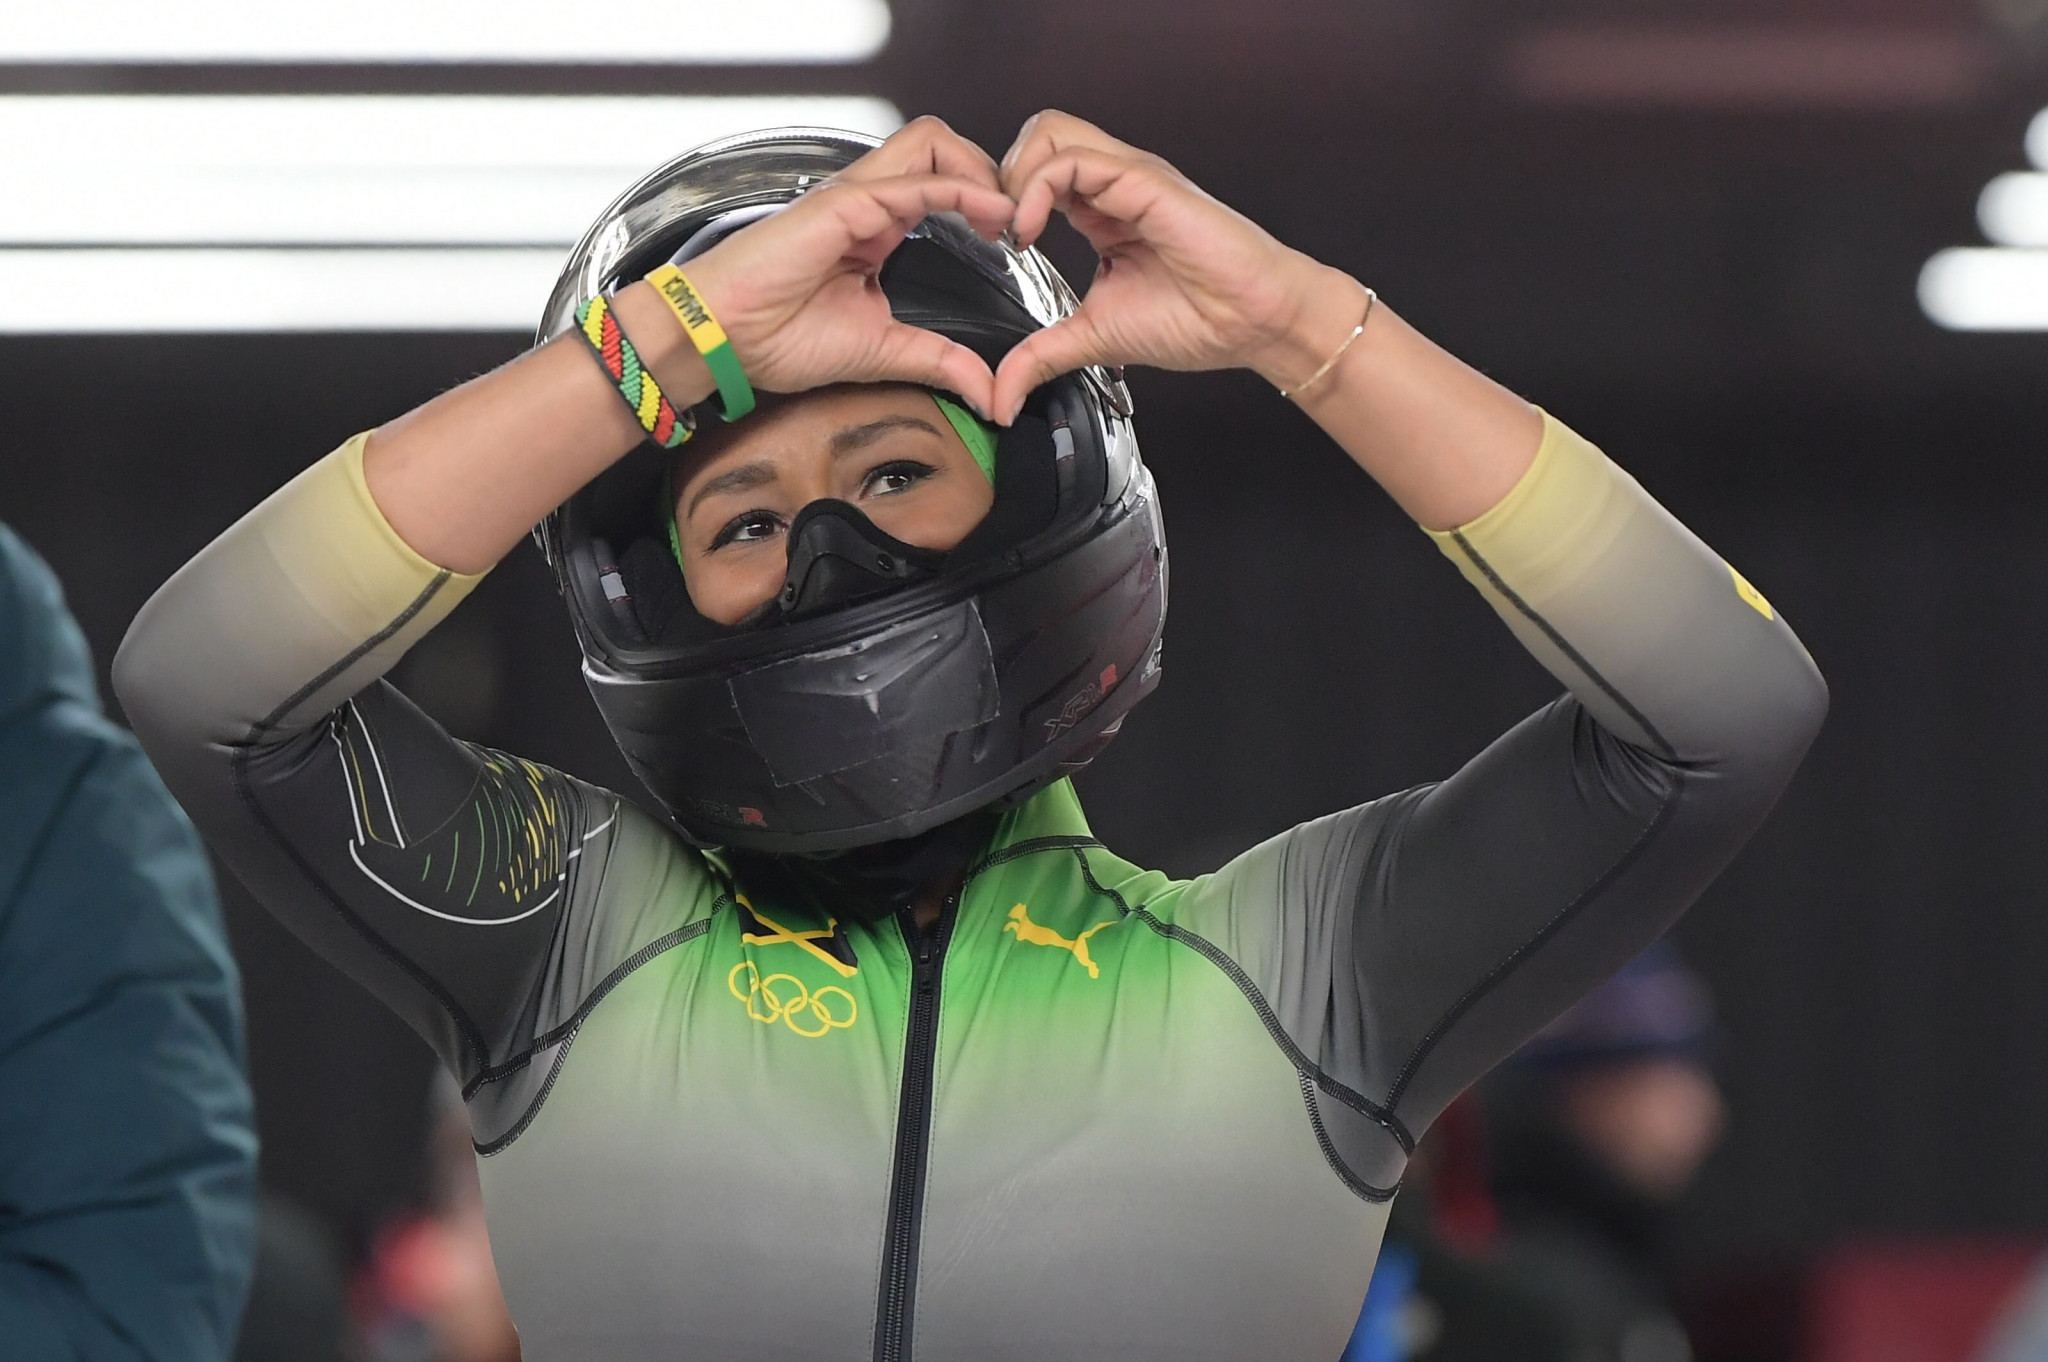 Jamaican bobsledder reportedly cleared by IBSF after positive drugs test